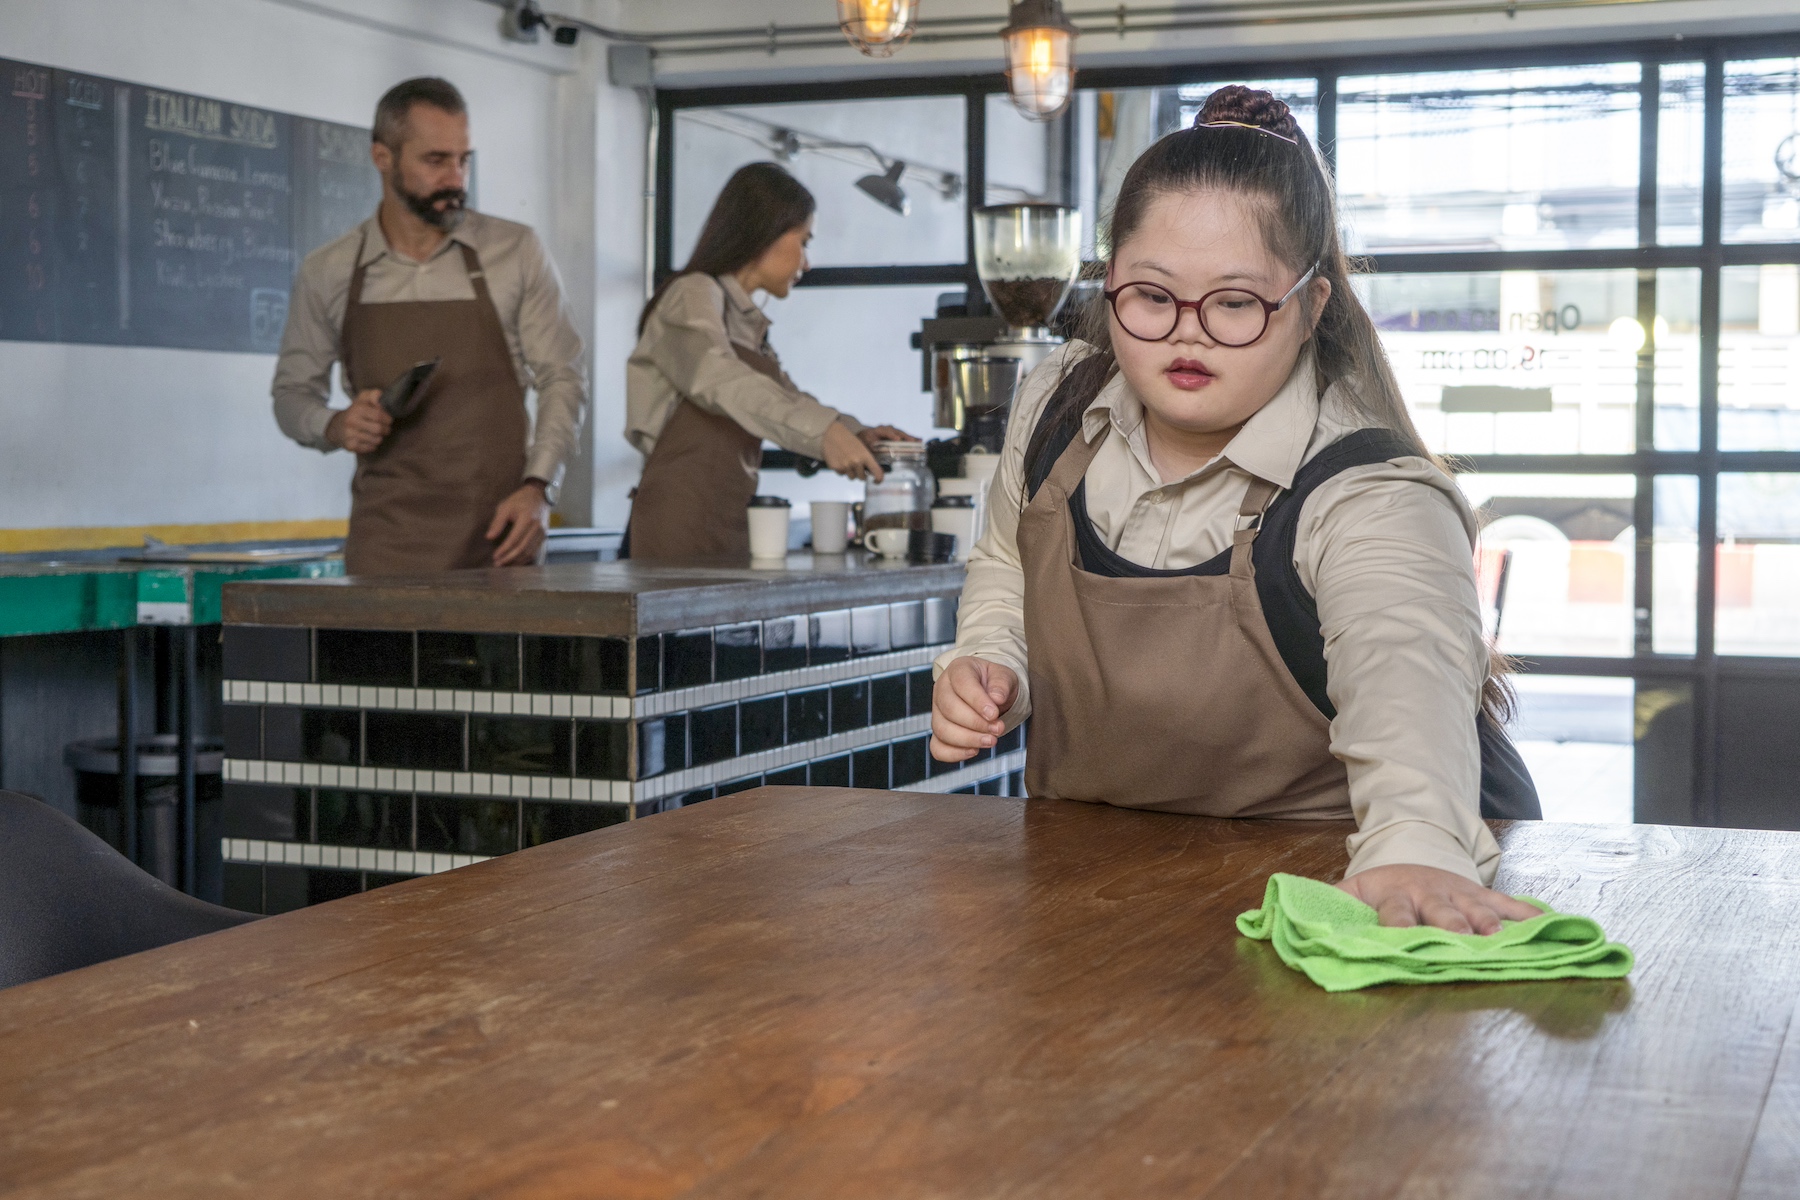 A young woman working as a barista cleans tables before the cafe opens for the day